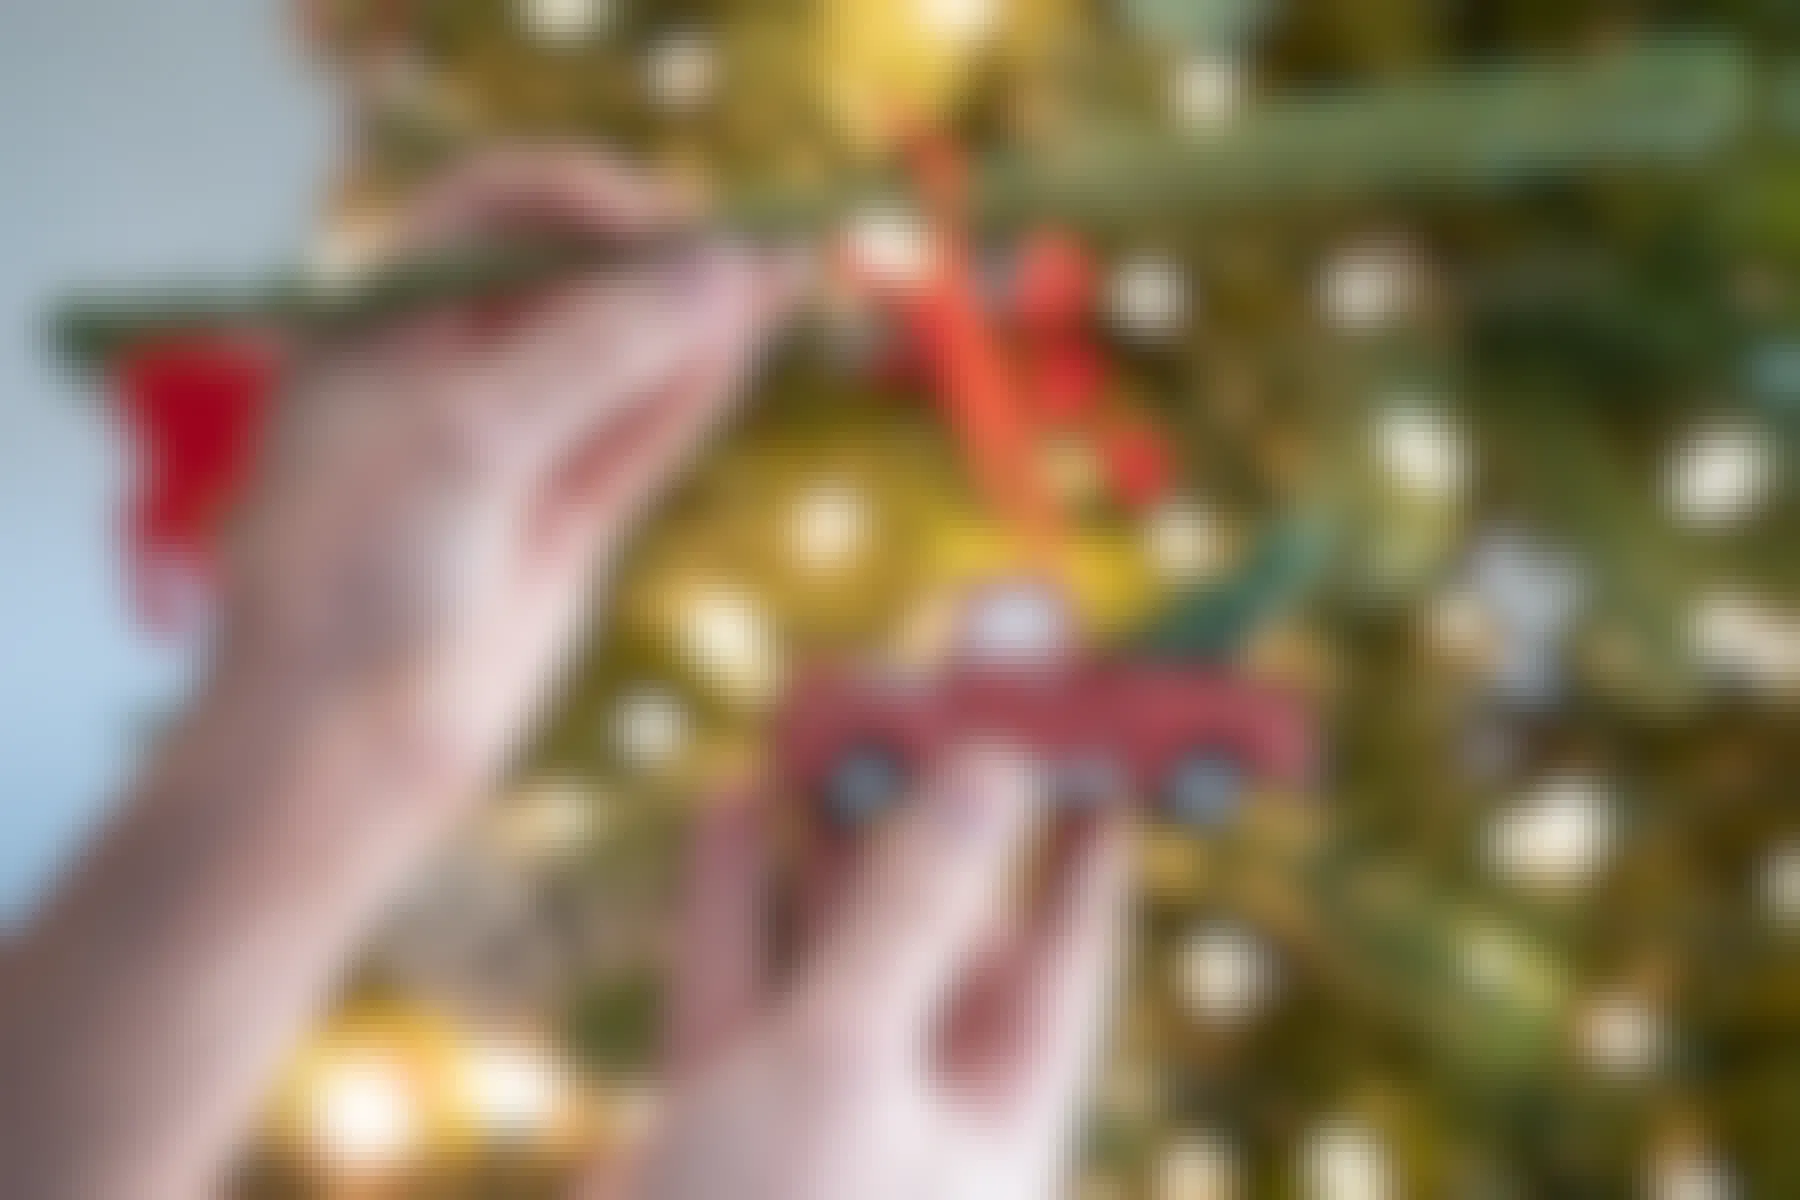 A person using an evergreen pipe cleaner to hang a heavy ornaments on a Christmas tree